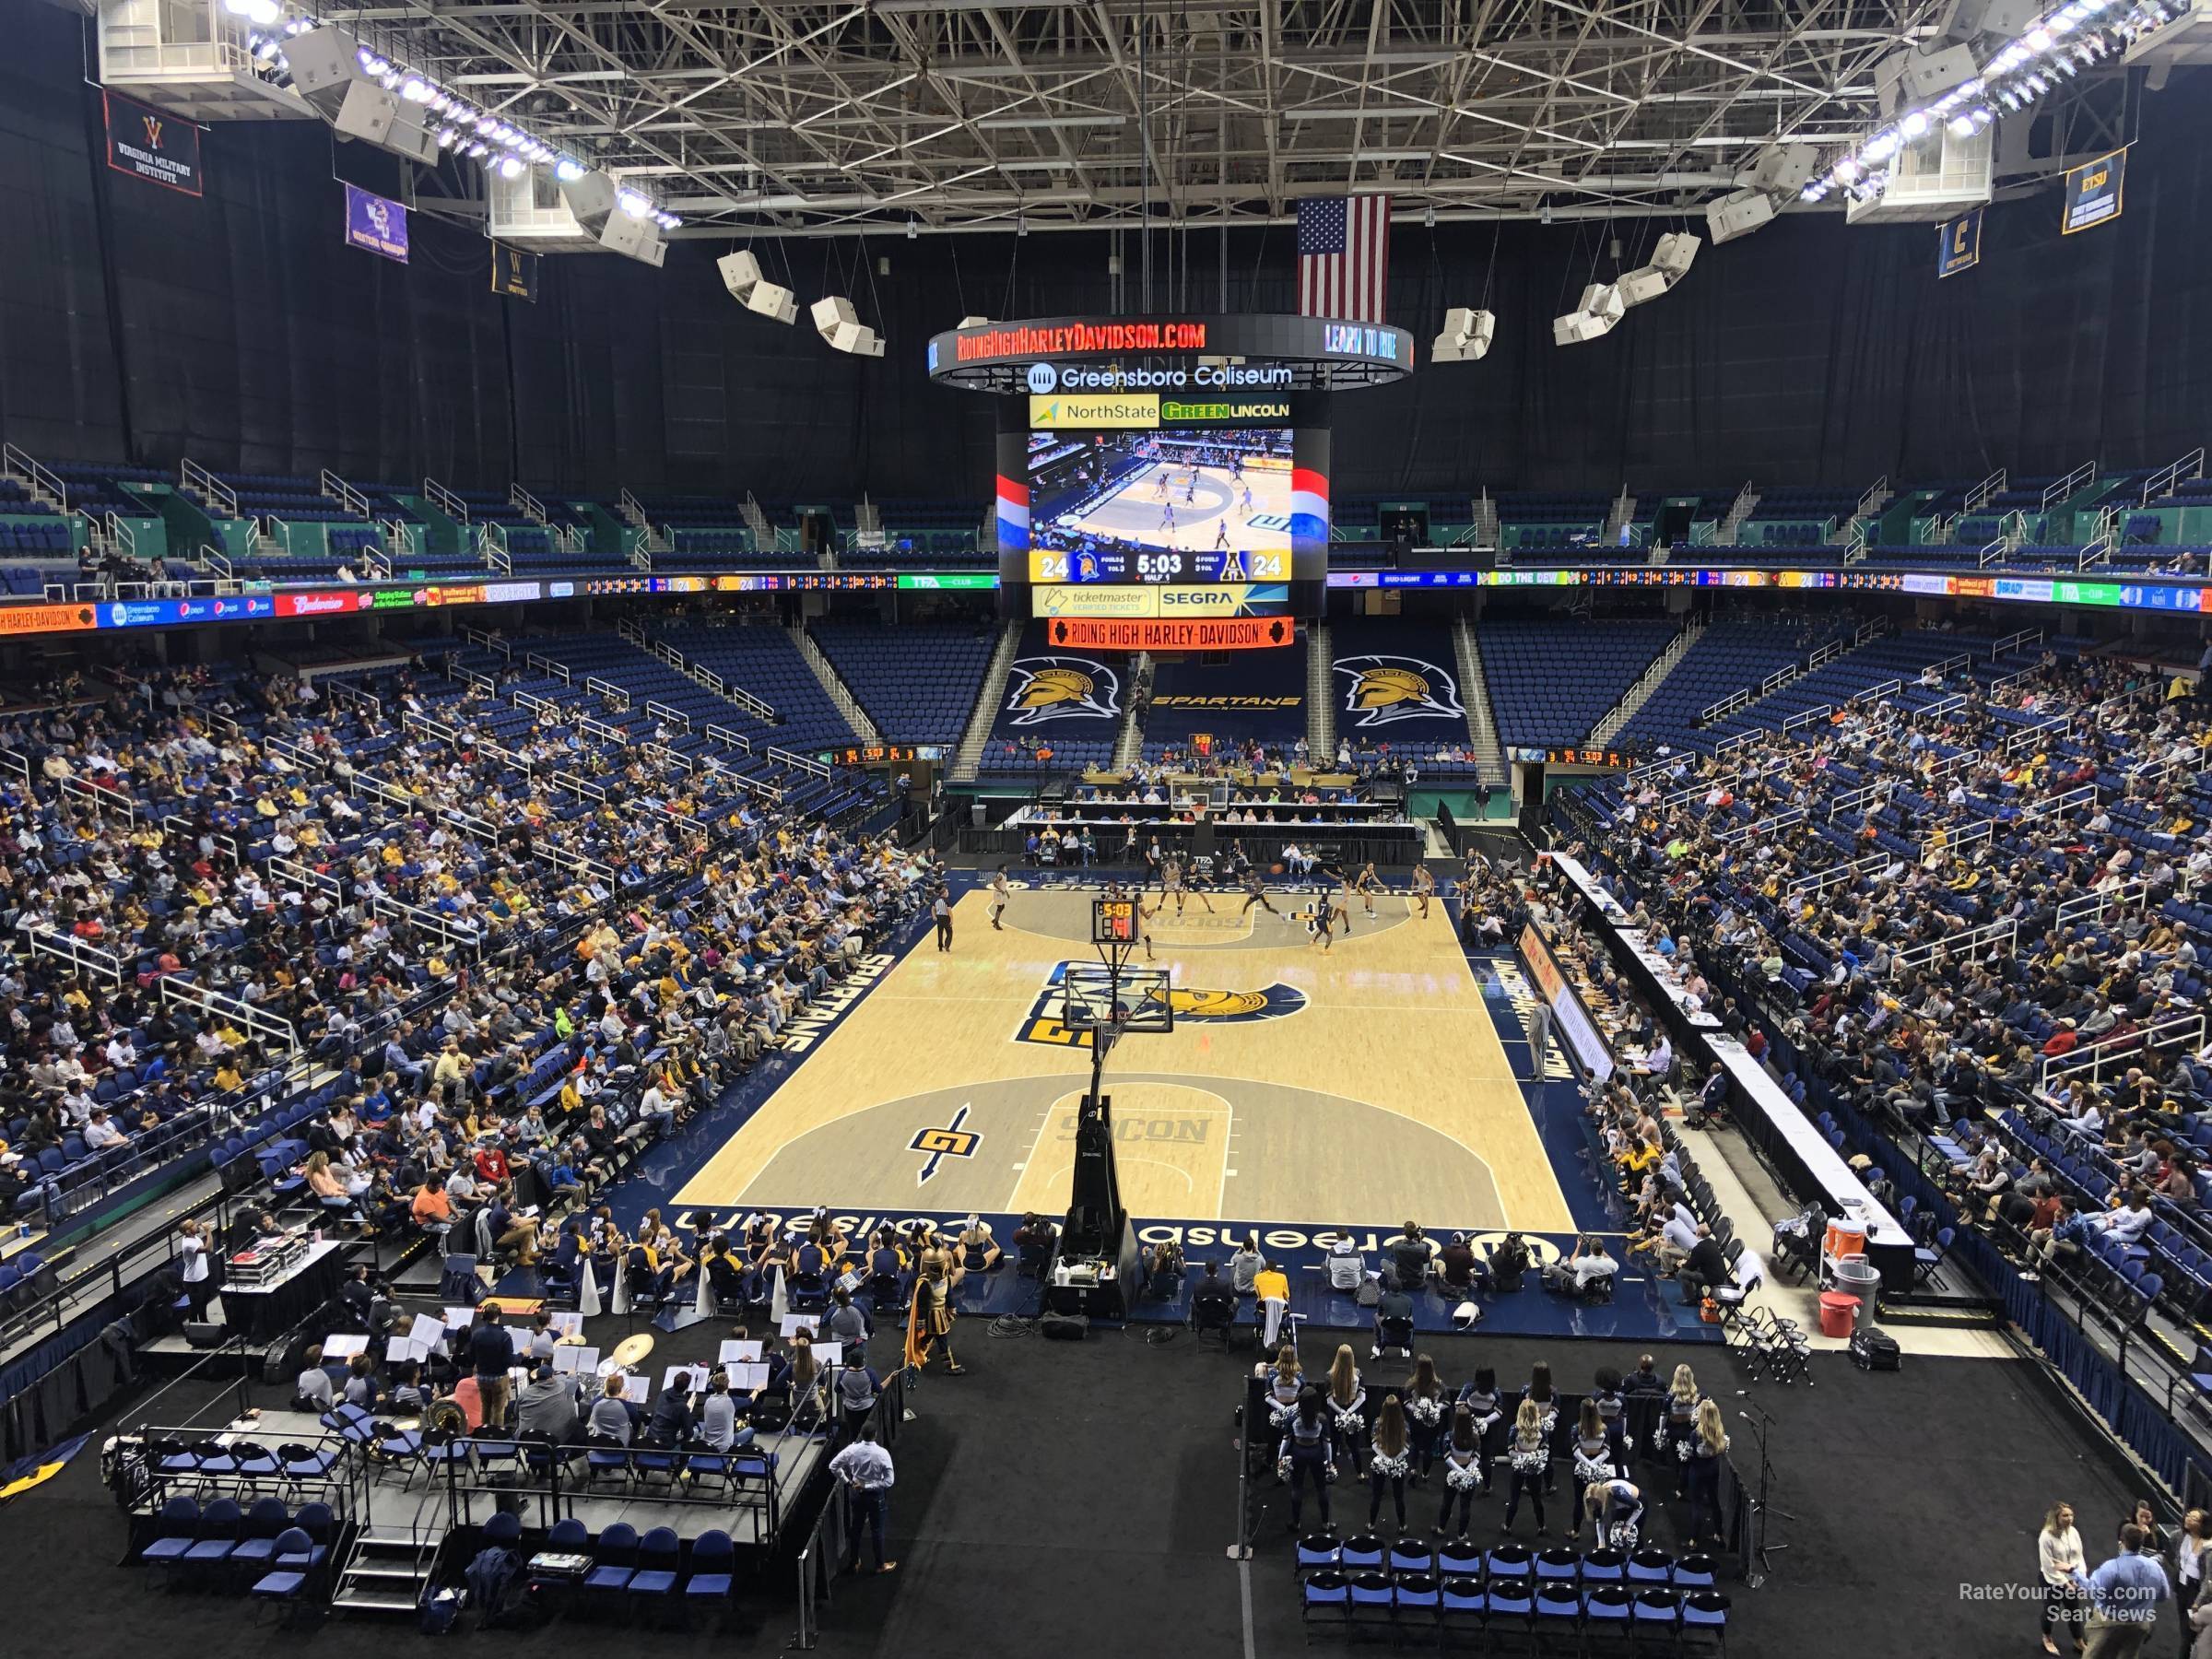 section 201, row a seat view  for basketball - greensboro coliseum